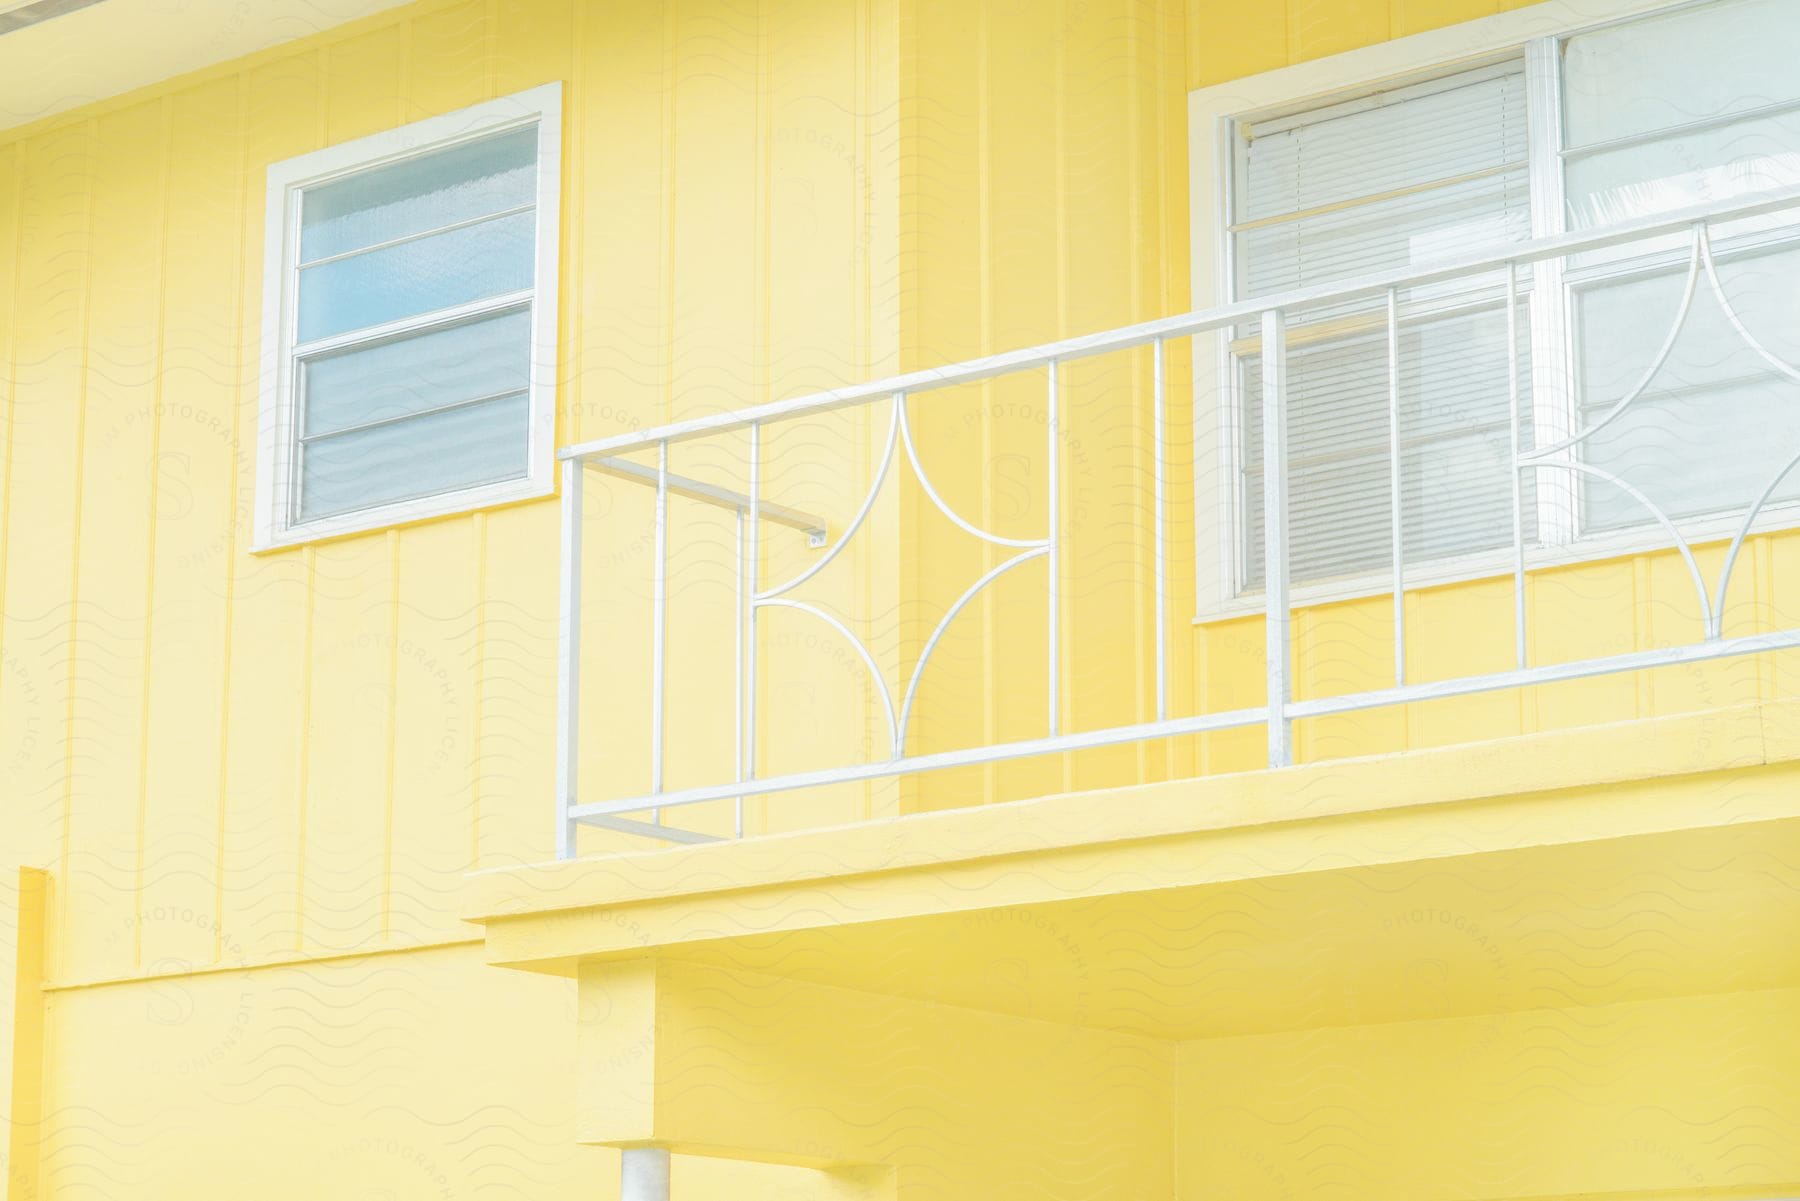 A close-up of a yellow house with a white balcony and windows on the second floor, the windows have white blinds.